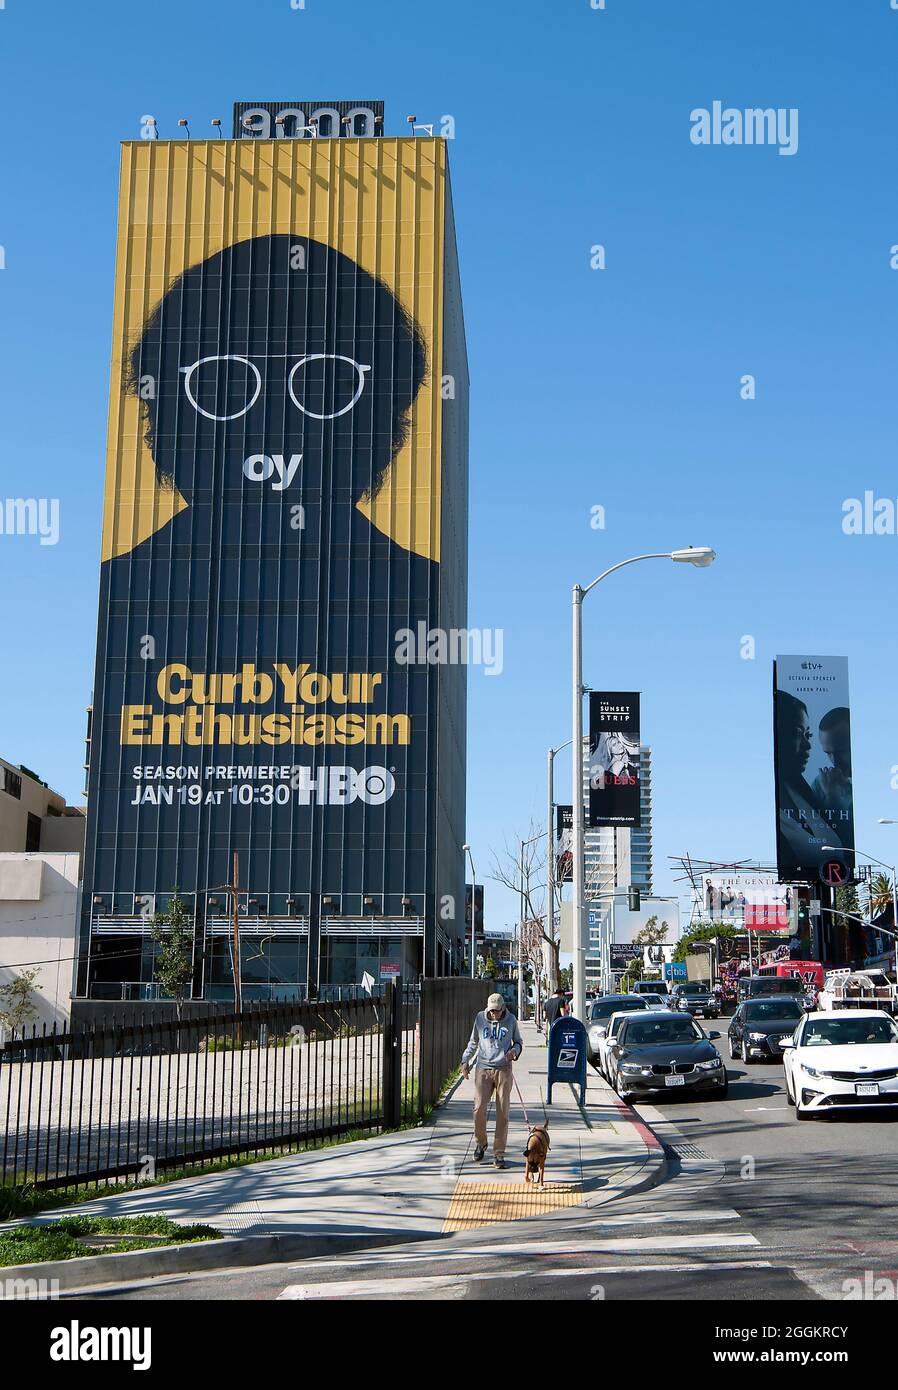 Giant billboard for Larry David's HBO show Curb Your Enthusiasm on the Sunset Strip in Los Angeles, CA Stock Photo